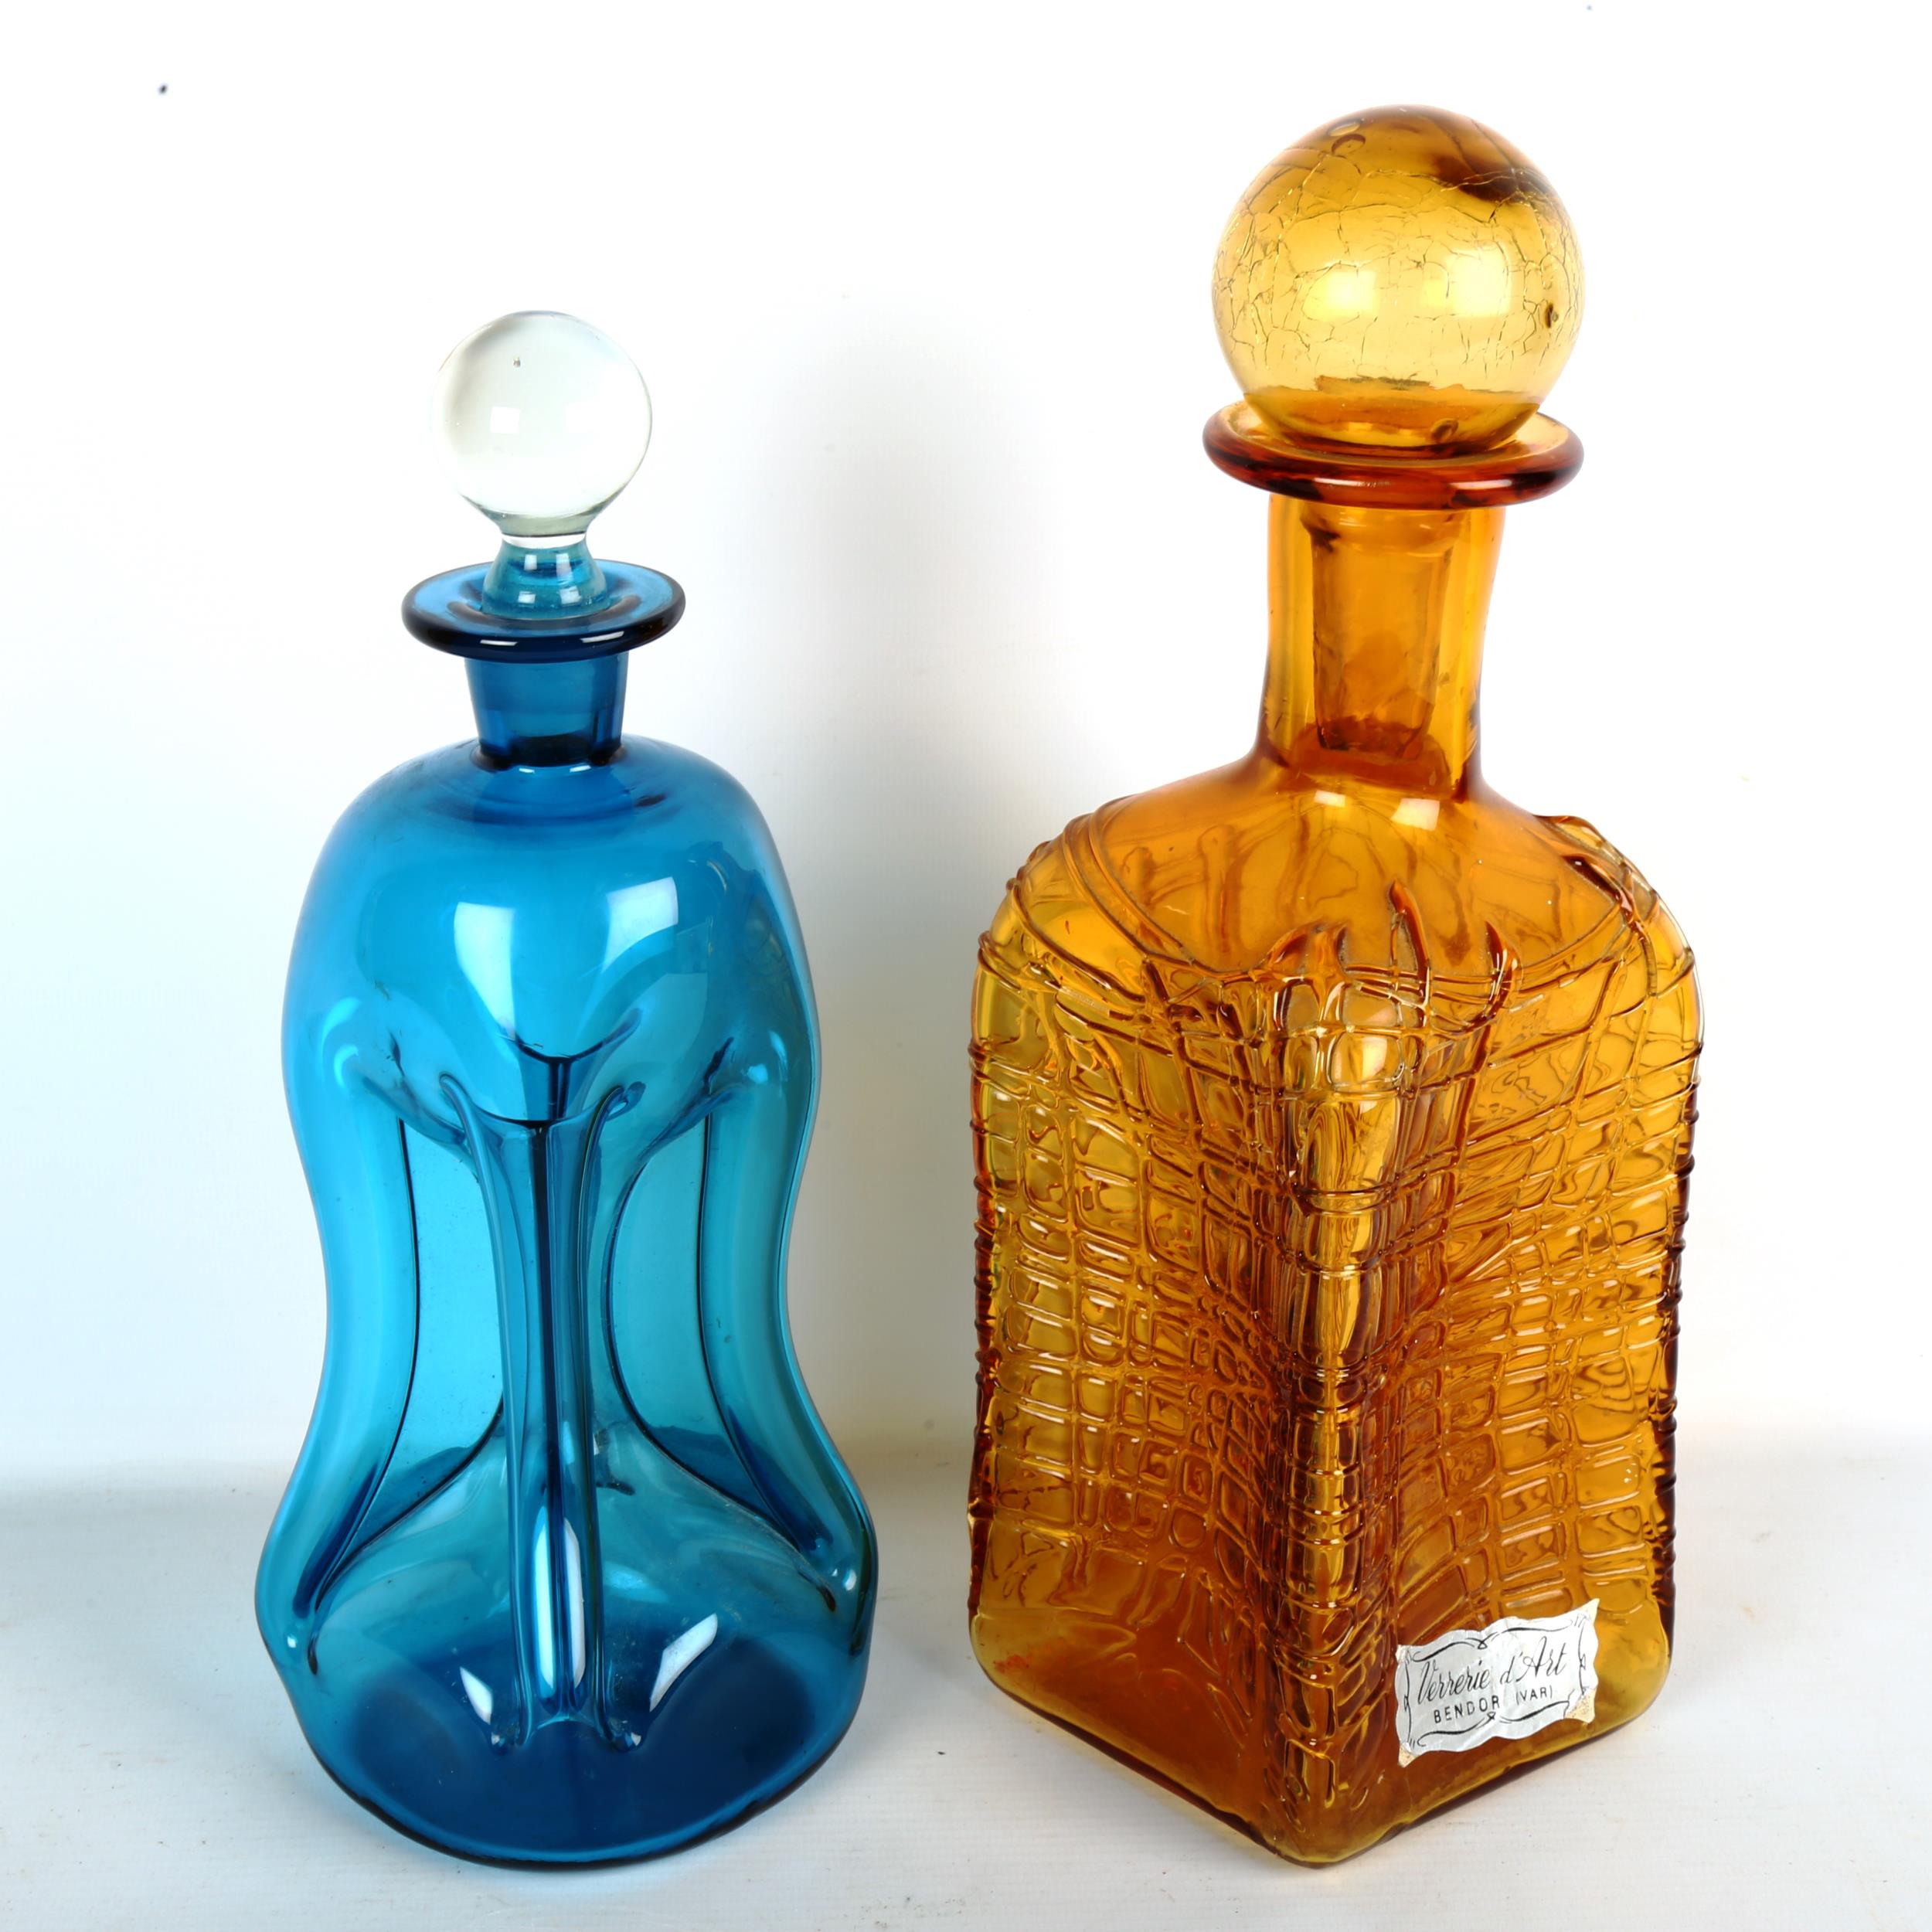 2 mid-century hand made decanters, blue glug glug and Amber decanter with makers label "Verrerie d'